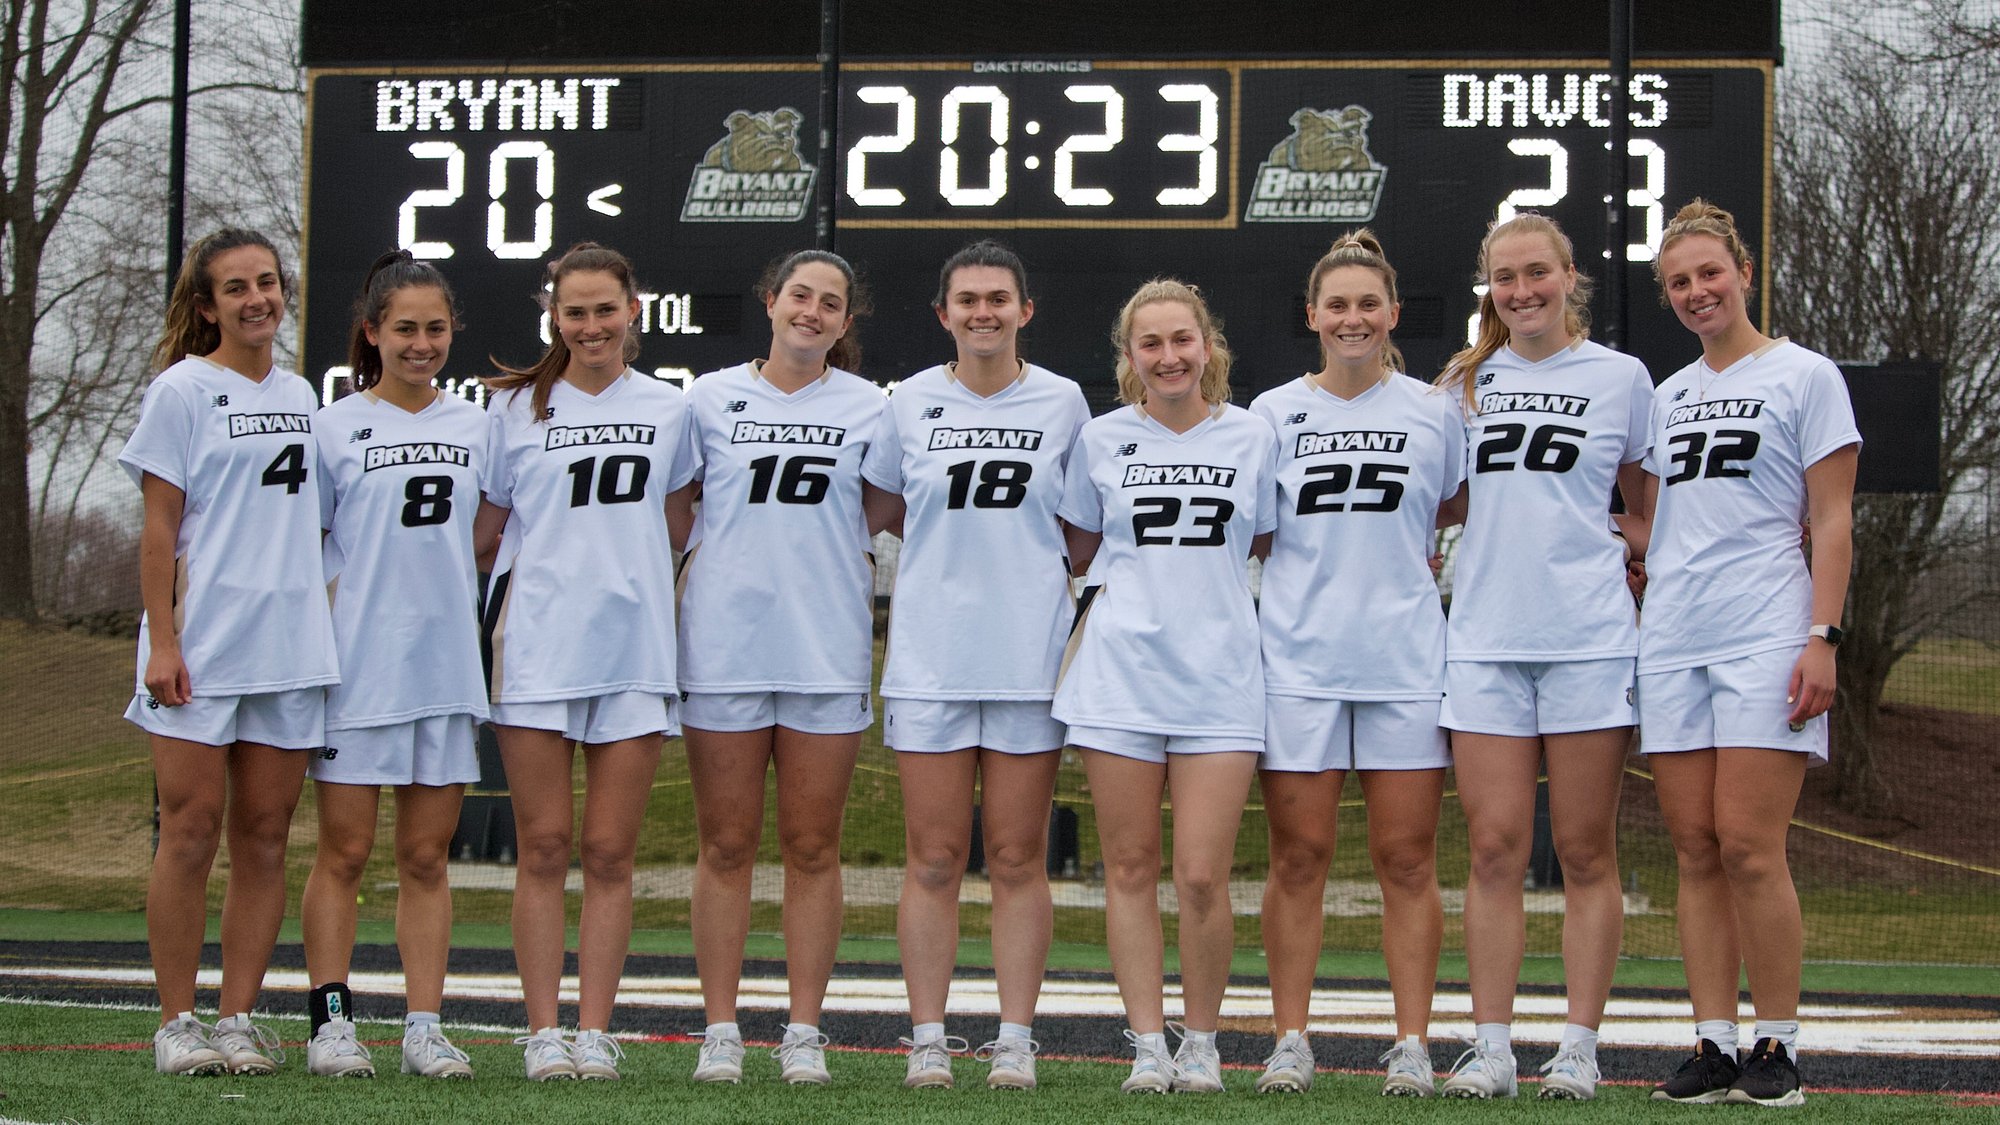 Bulldogs Host First Place Binghamton on Saturday for Senior Day